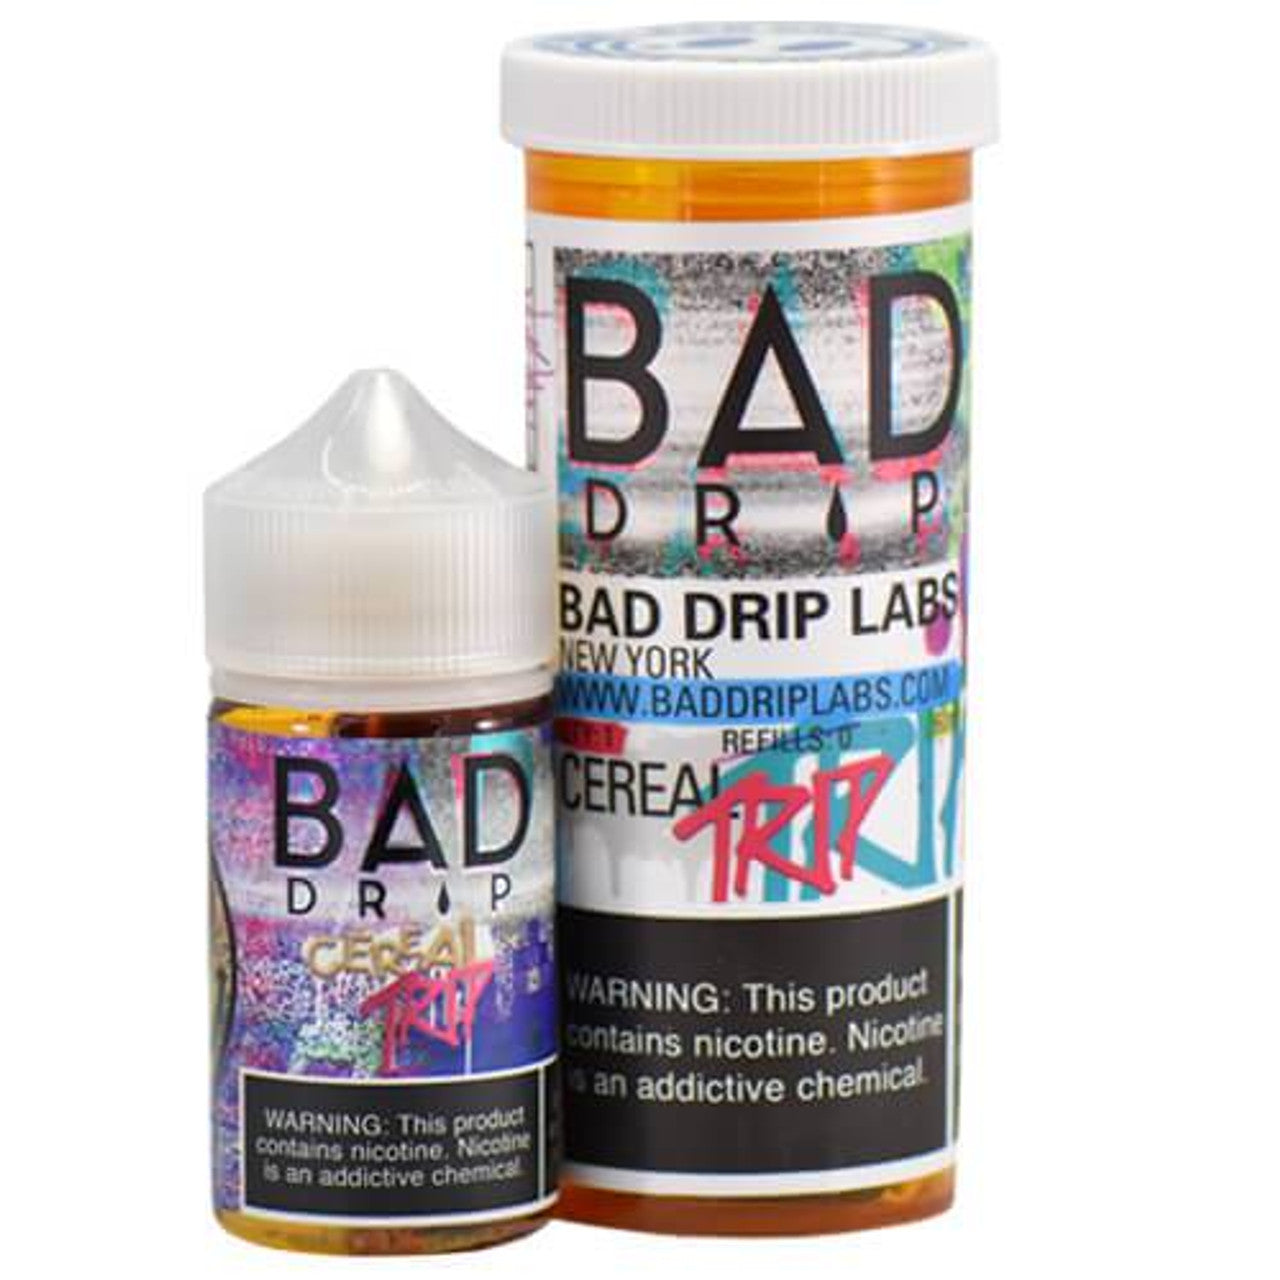 Bad Drip Labs: Cereal Trip